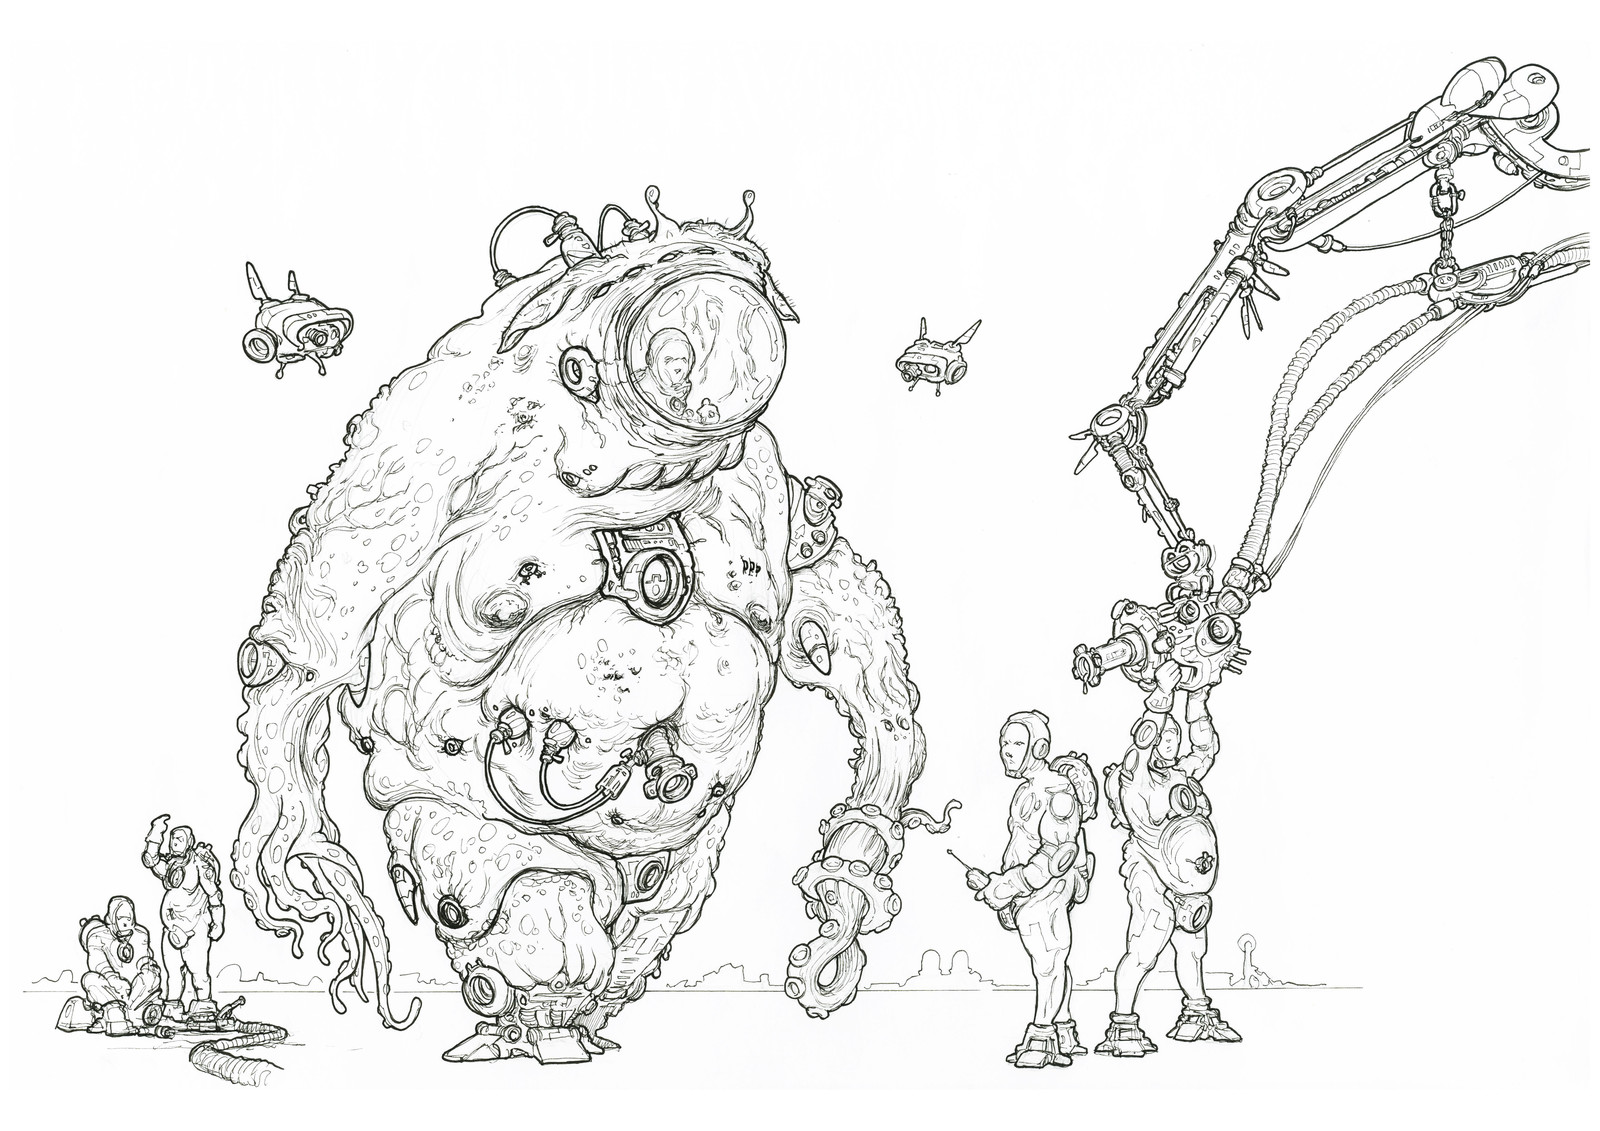 "Meat-suits 002 - Heading out!" - Symbiotic Creature suits grown in a lab and bio-mechanically altered for use in the harvesting of valuable but highly toxic alien fungi...